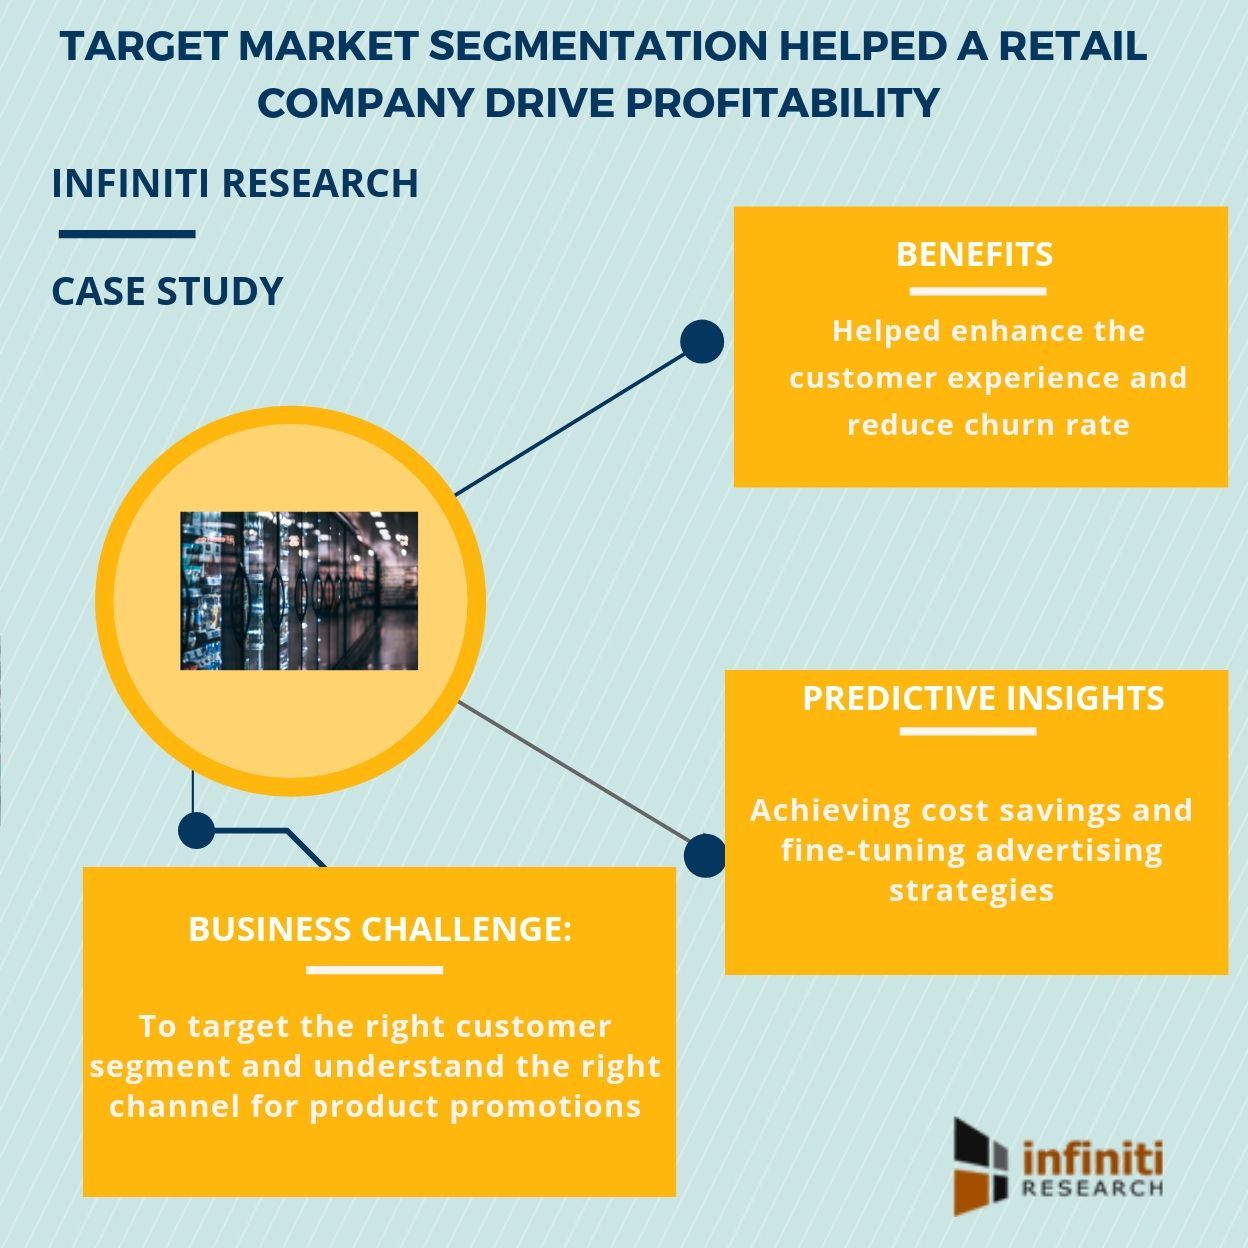 Target Market Segmentation Helped Boost Profitability and Reduce Marketing  Spend for a Retail Company – Download Infiniti's FREE Resource to Know How